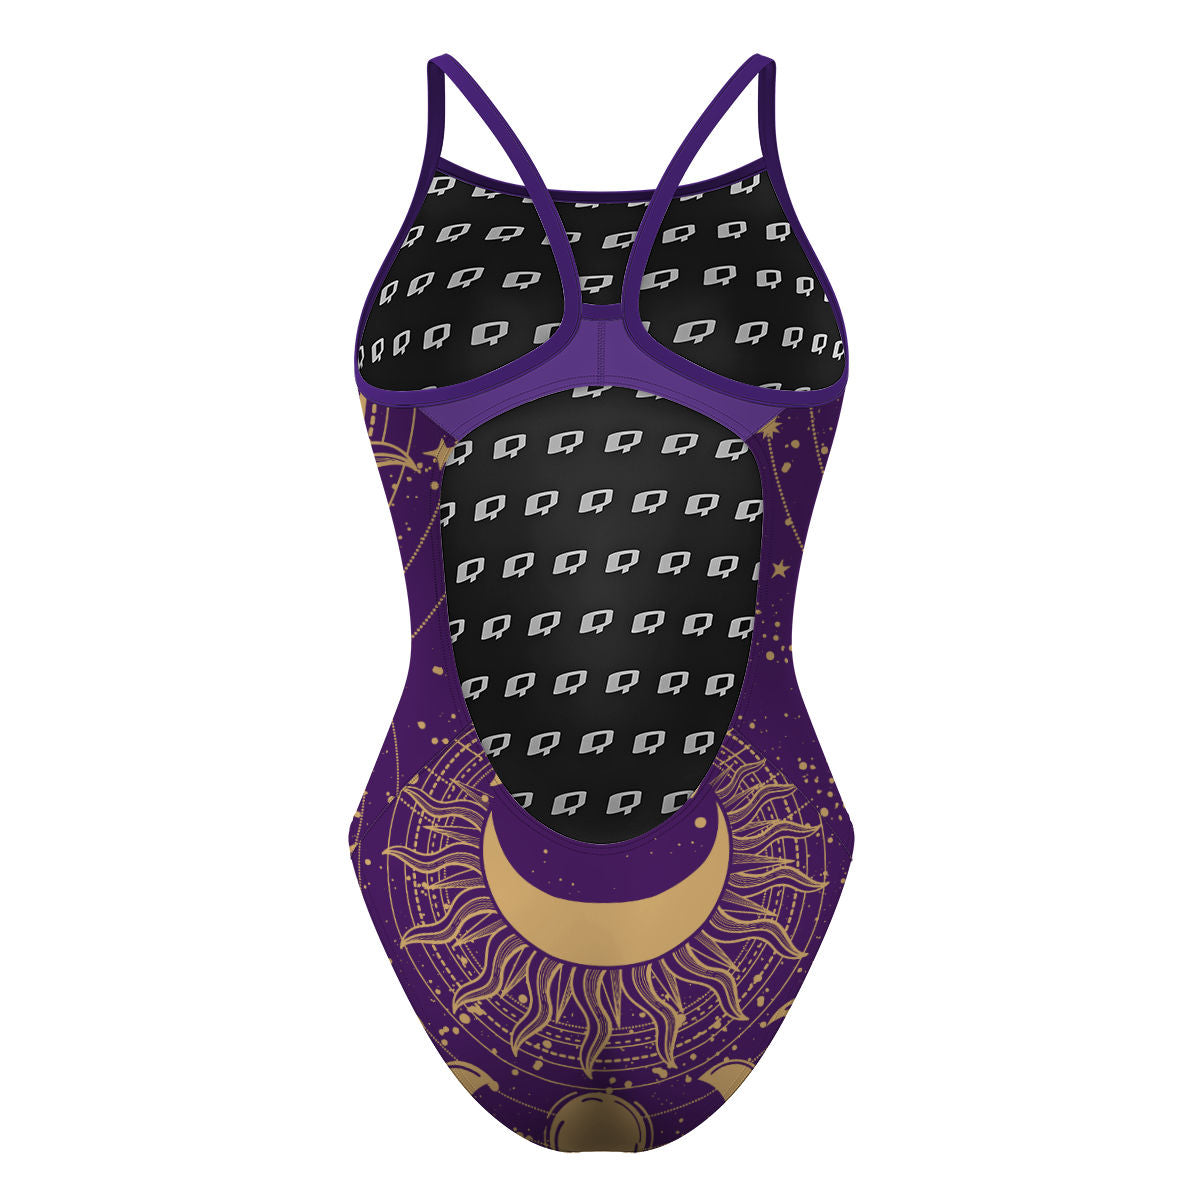 Know your power - Skinny Strap Swimsuit